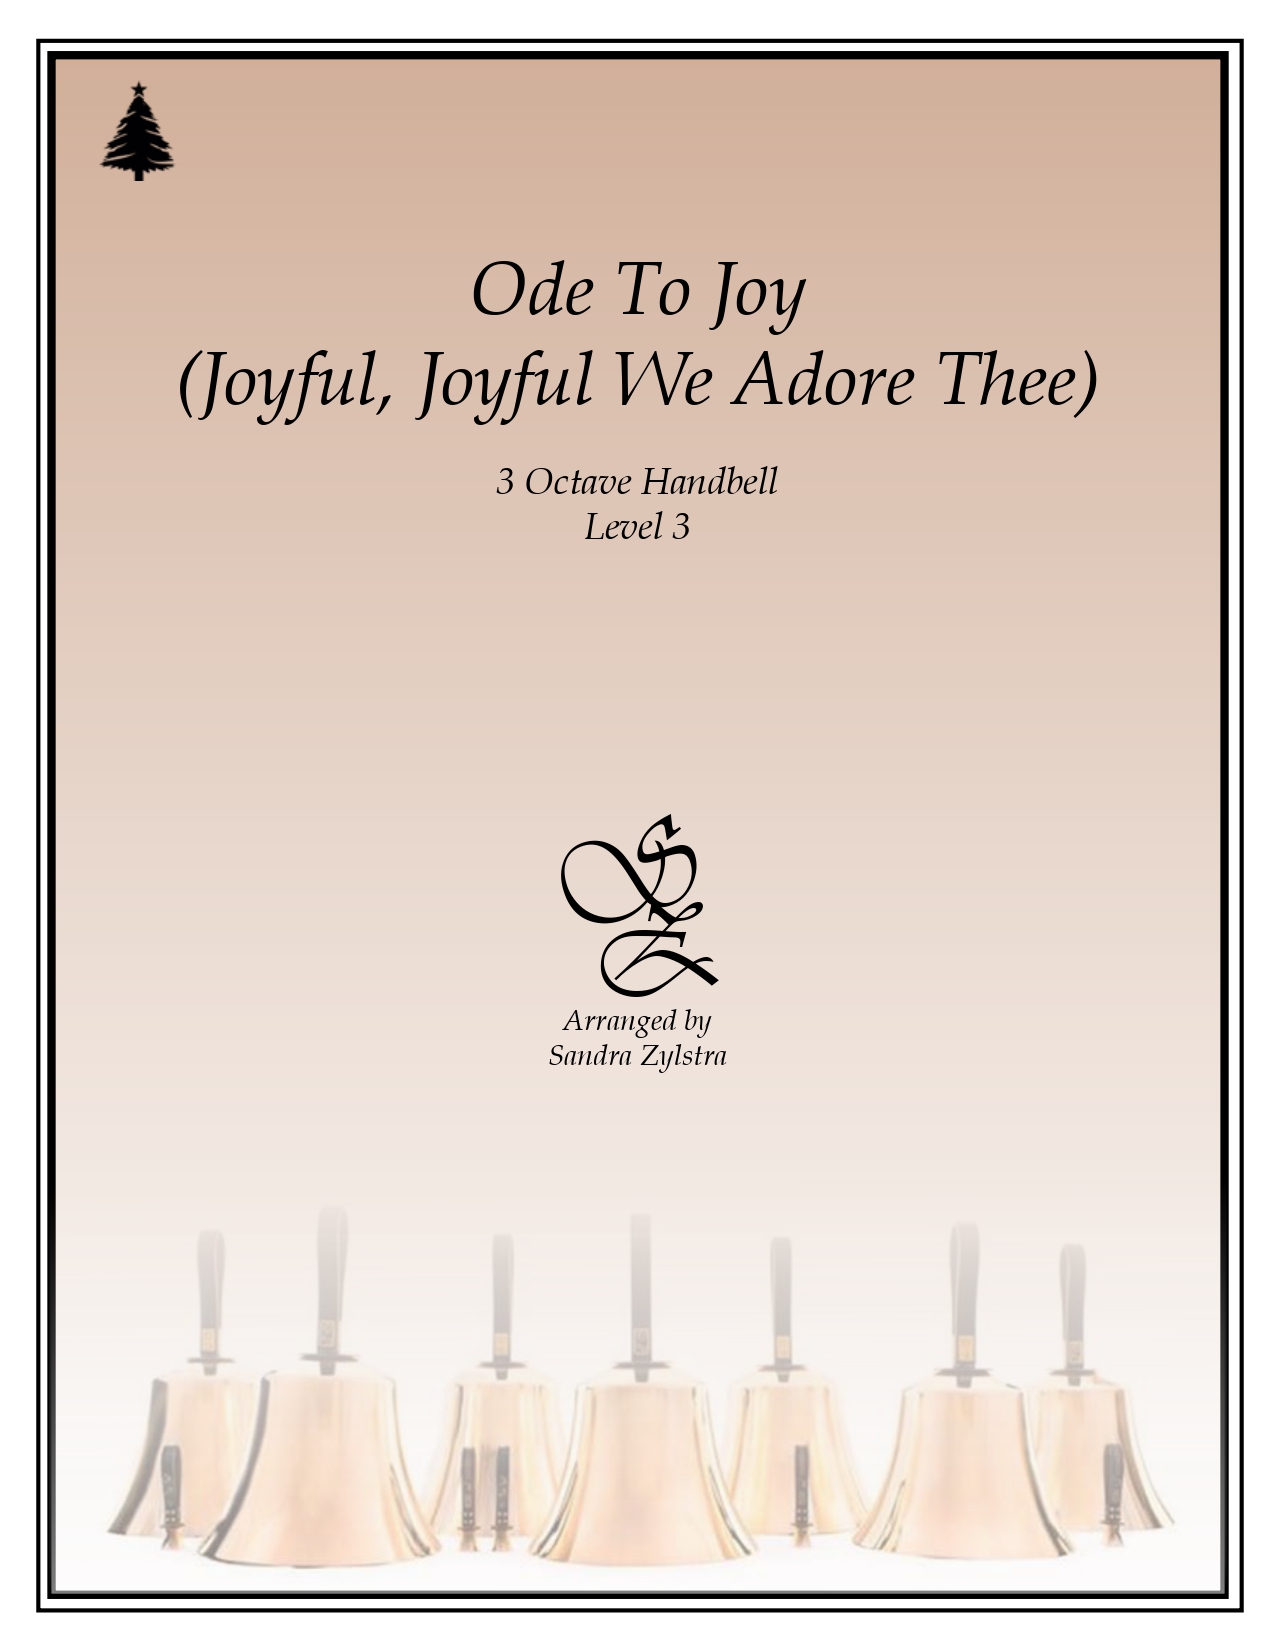 Ode To Joy 3 octave handbells cover page 00011